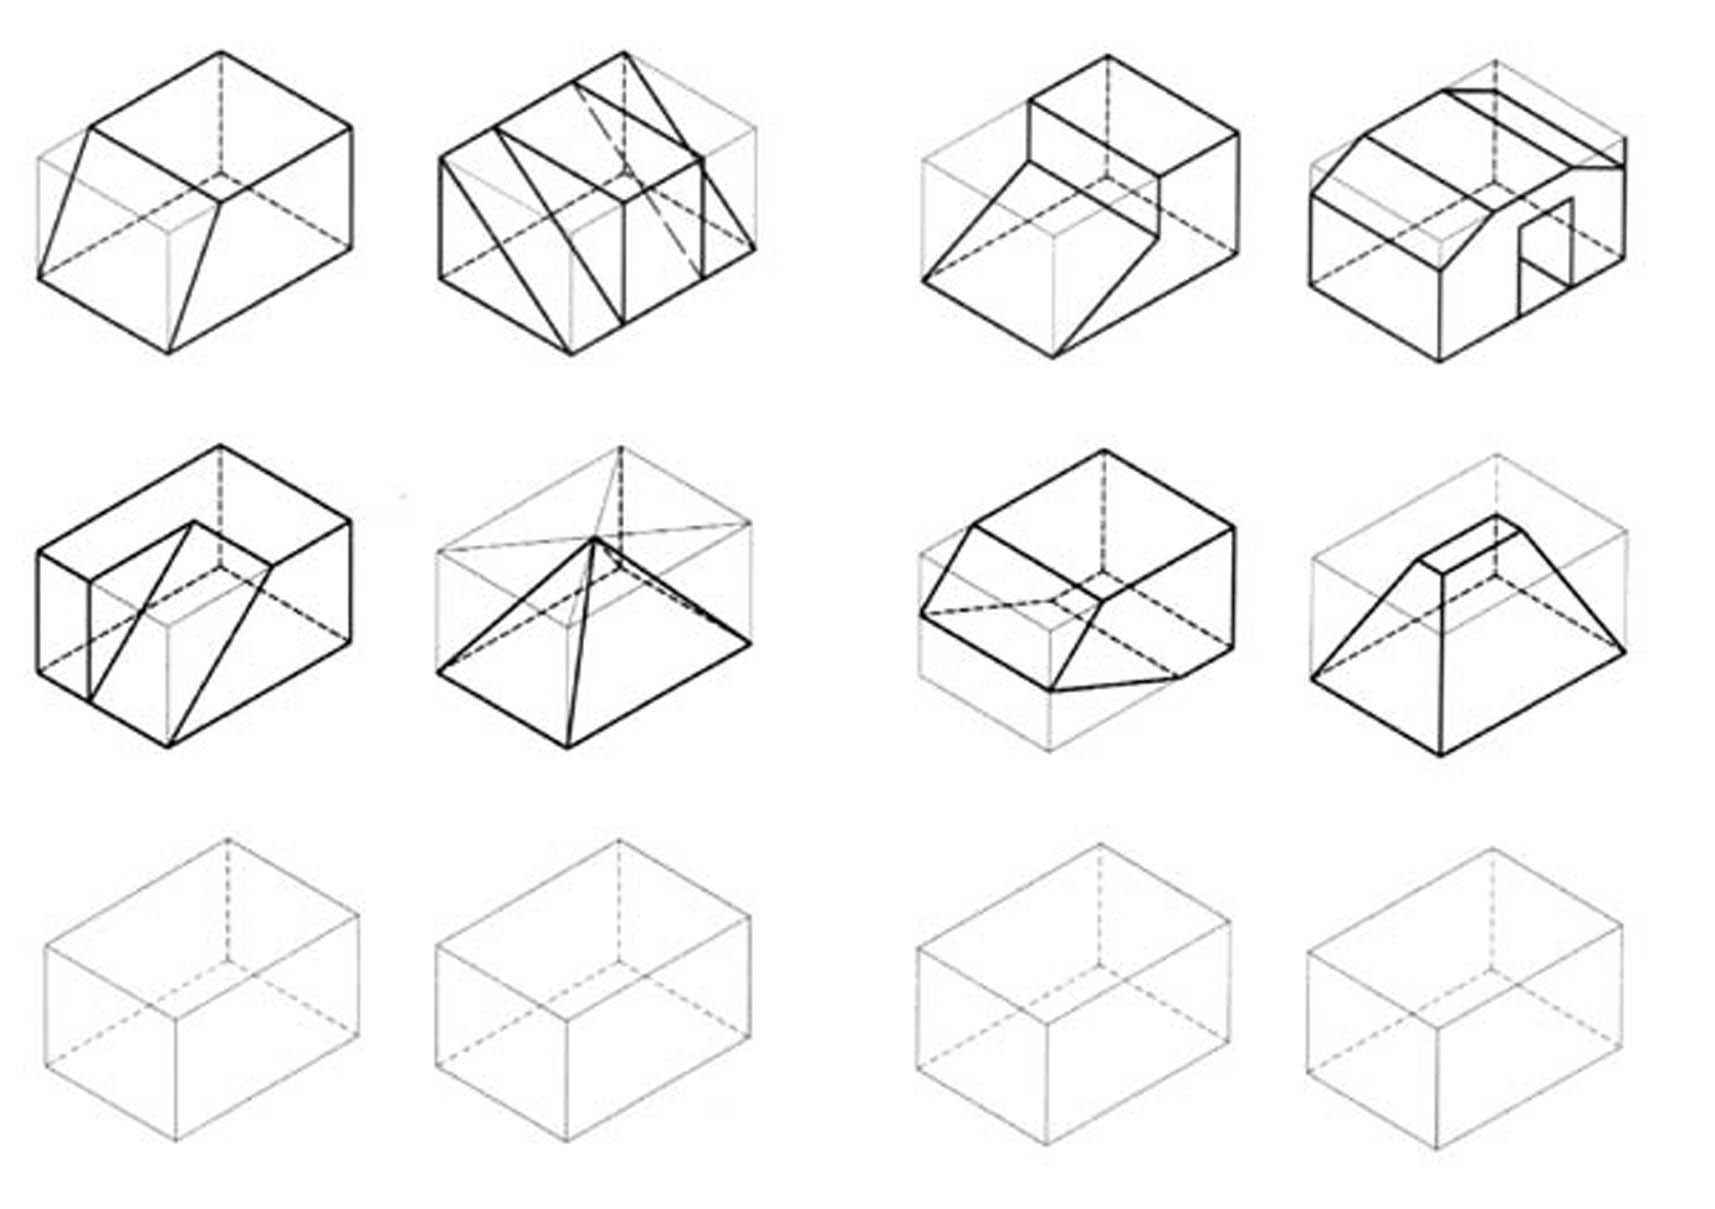 easy isometric drawing exercises